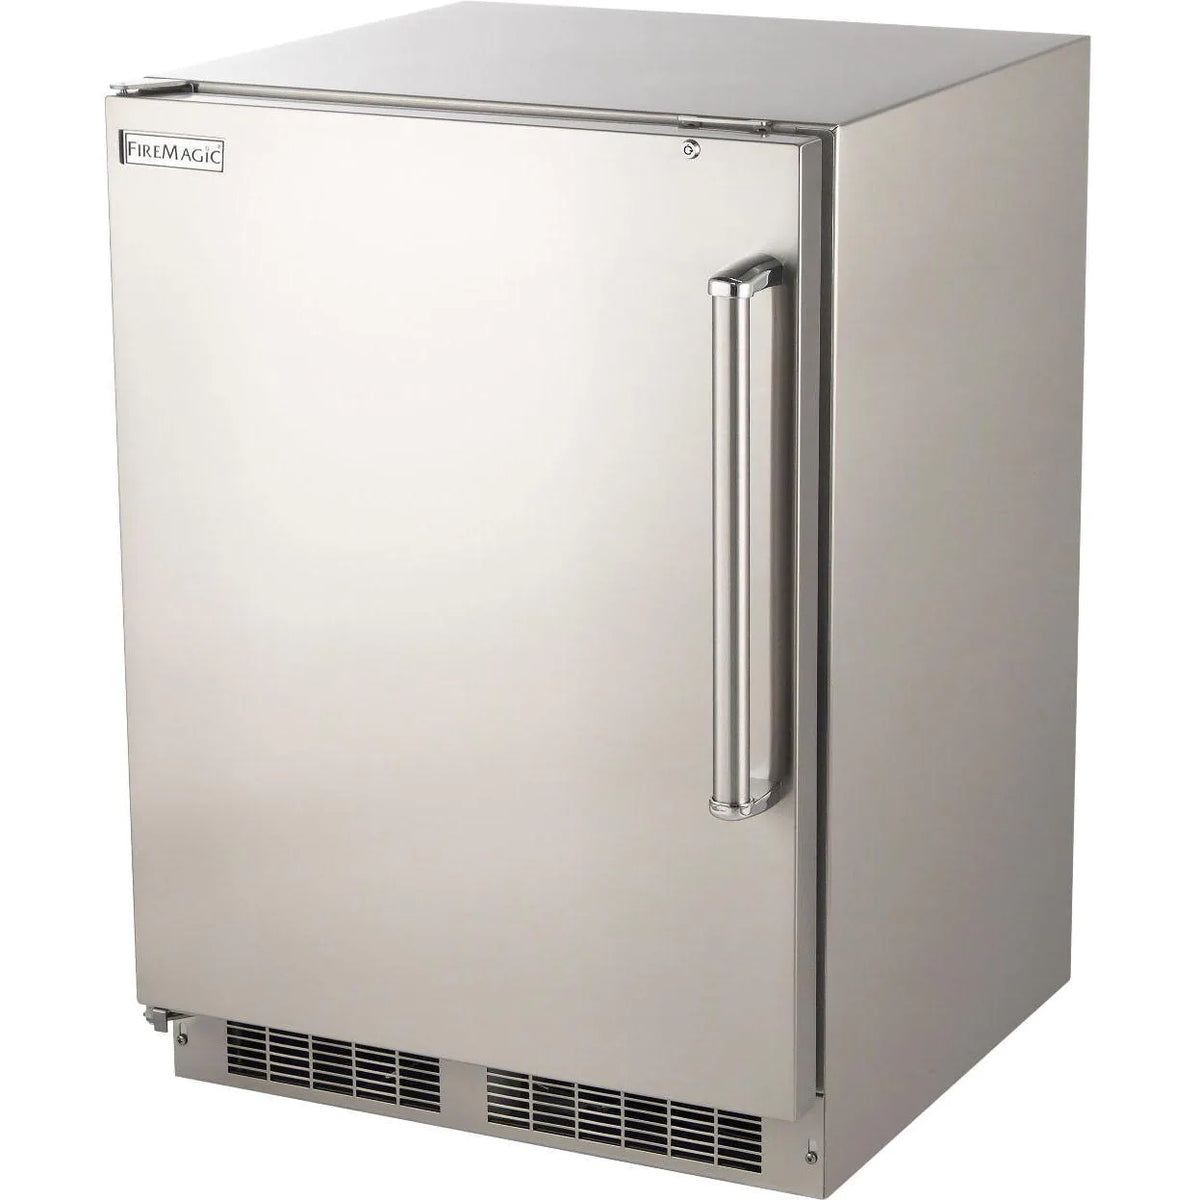 Fire Magic 24 Inch Outdoor Rated Compact Refrigerator